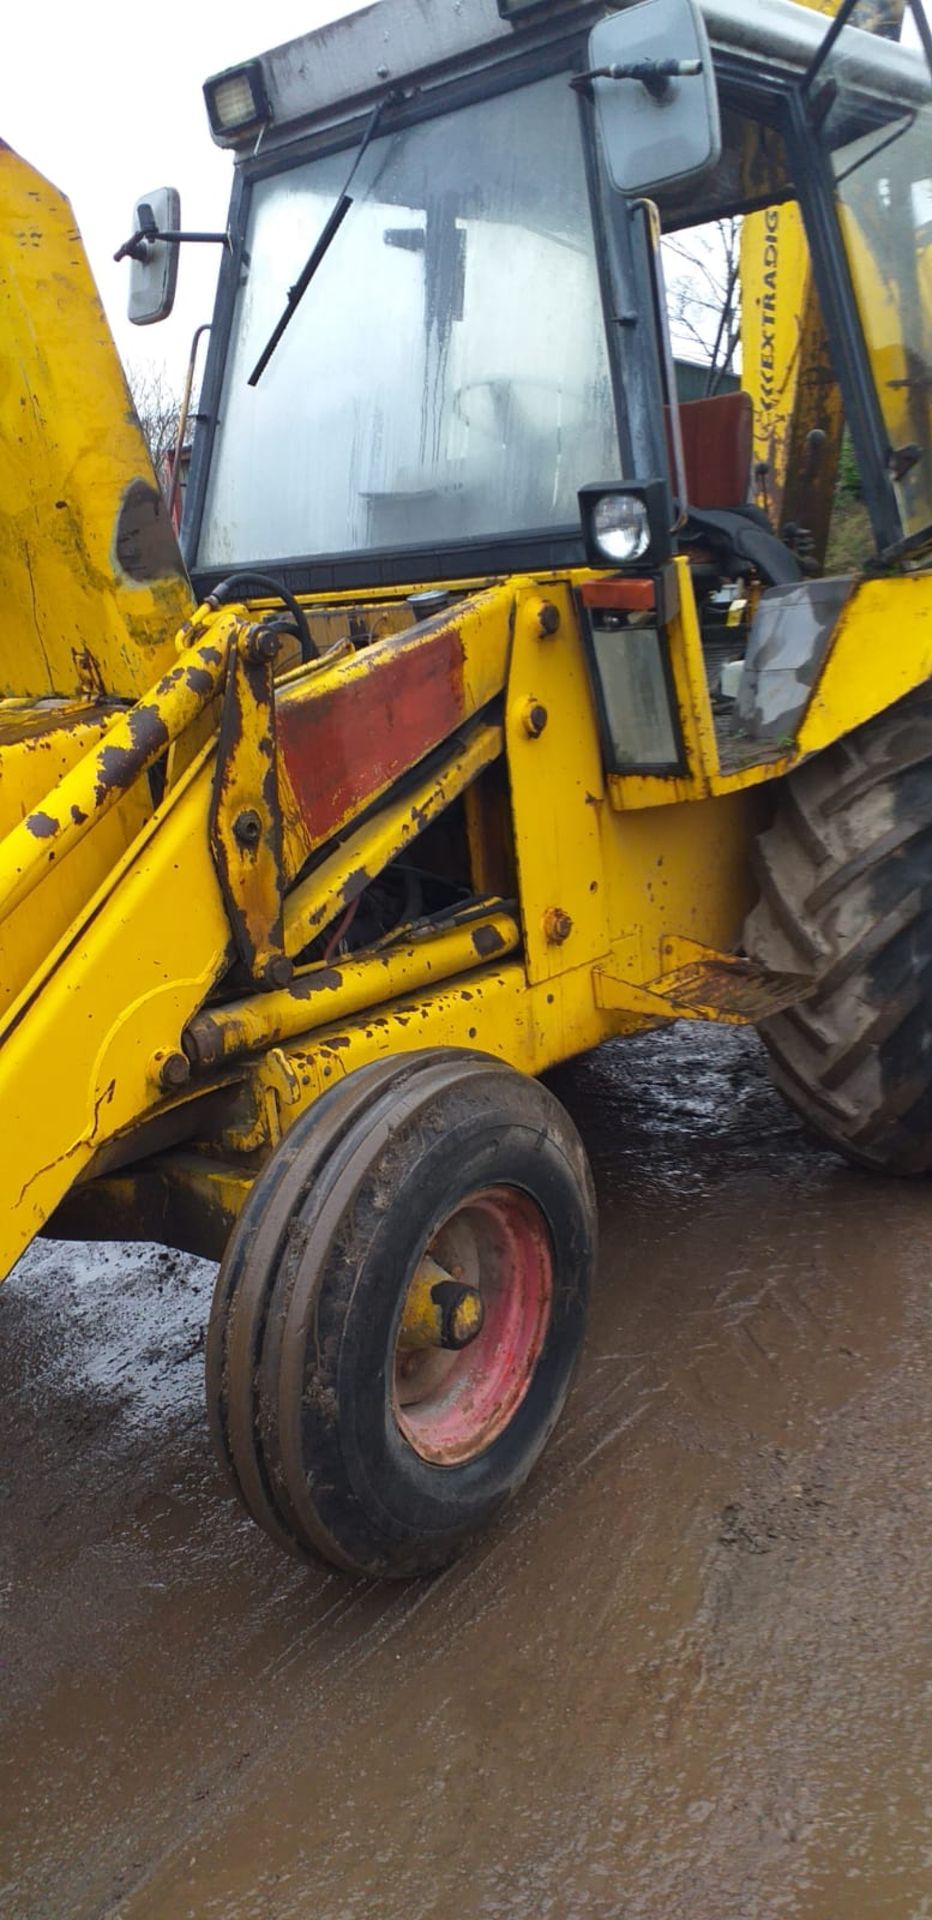 JCB 3CX SITE MASTER EXTRA DIG 1983 3 X BUCKETS AS SHOWN - 4 IN 1 FRONT LOADING BUCKET, GOOD CAB - Image 5 of 18